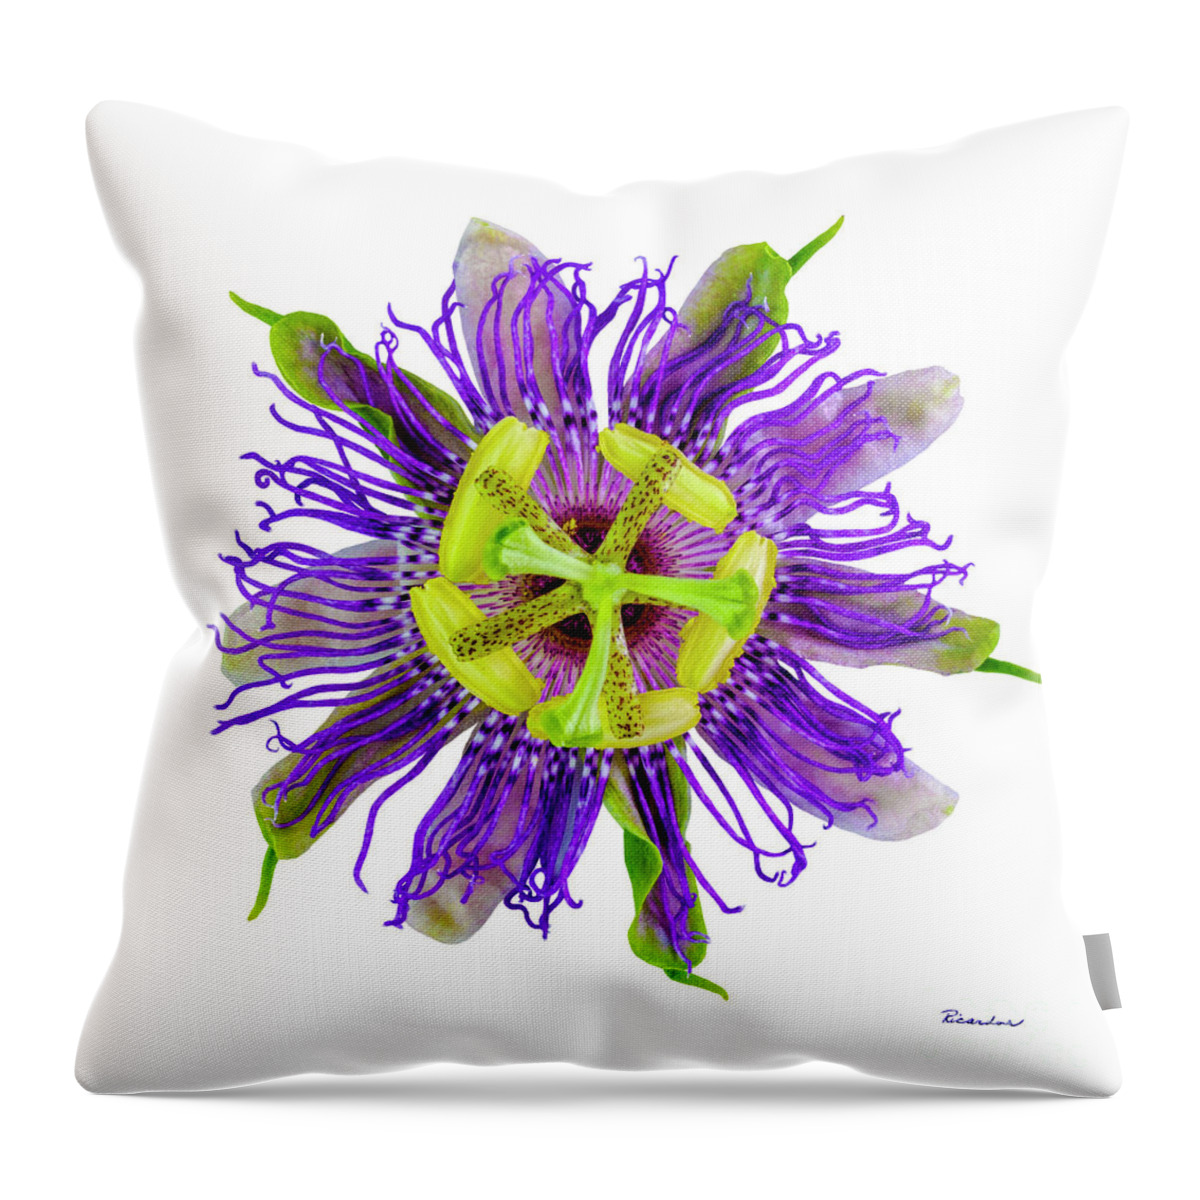 Expressive Throw Pillow featuring the photograph Expressive Yellow Green and Violet Passion Flower 50674A by Ricardos Creations